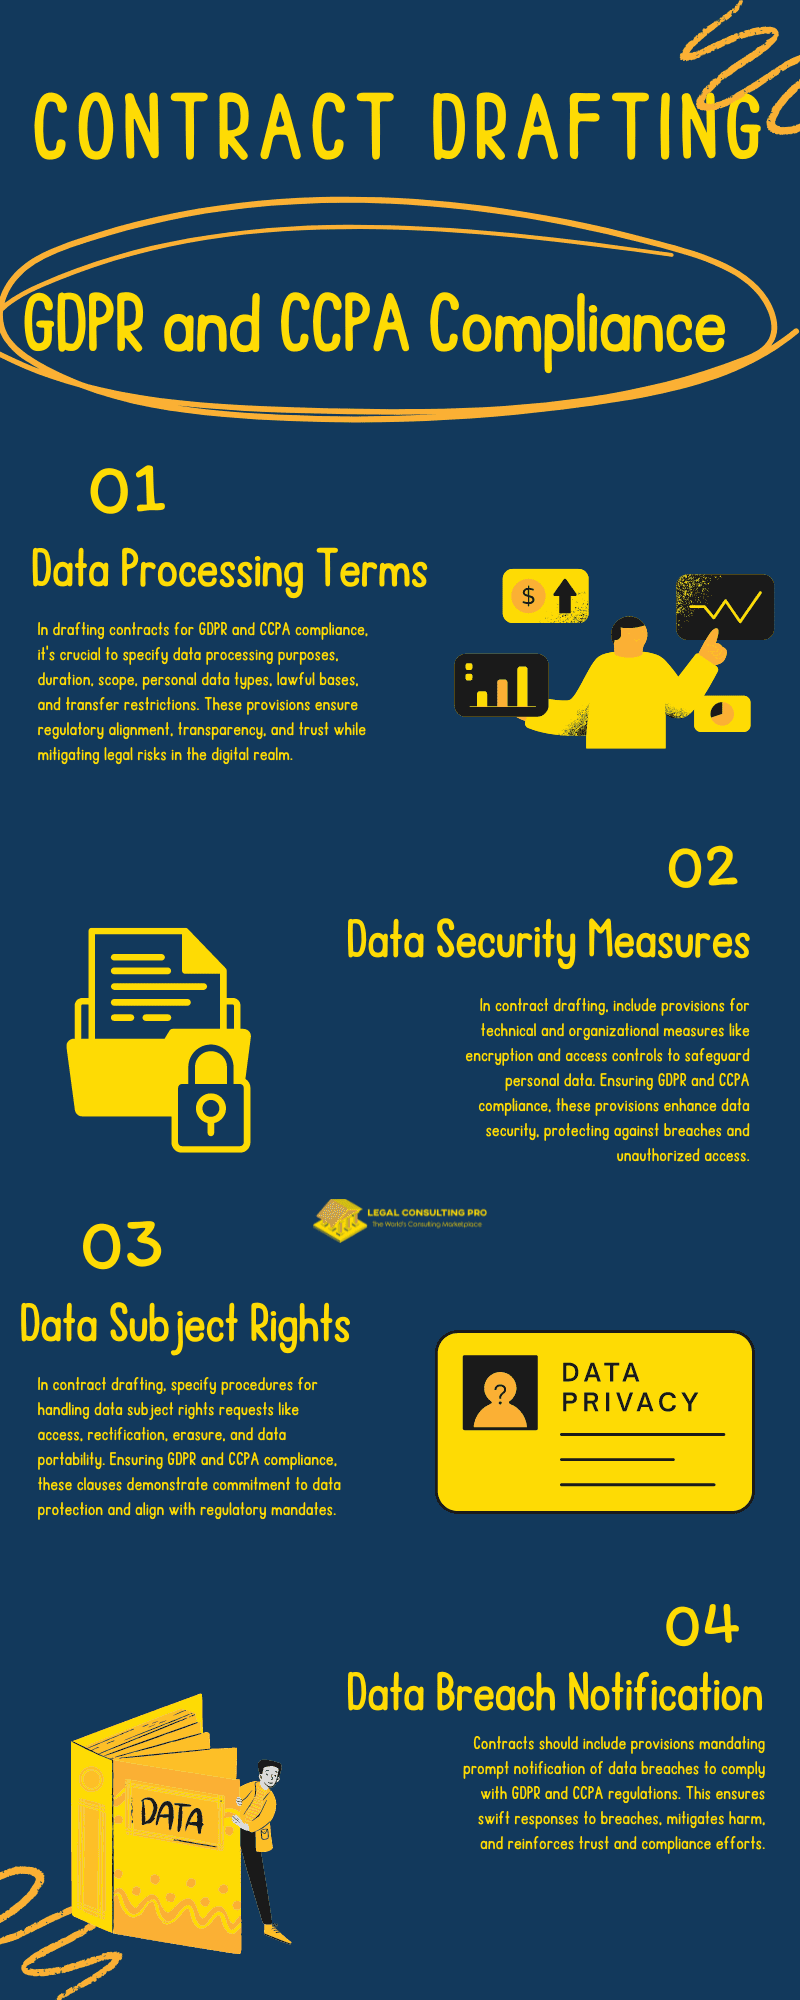 Contract Drafting for GDPR and CCPA Compliance Infographic